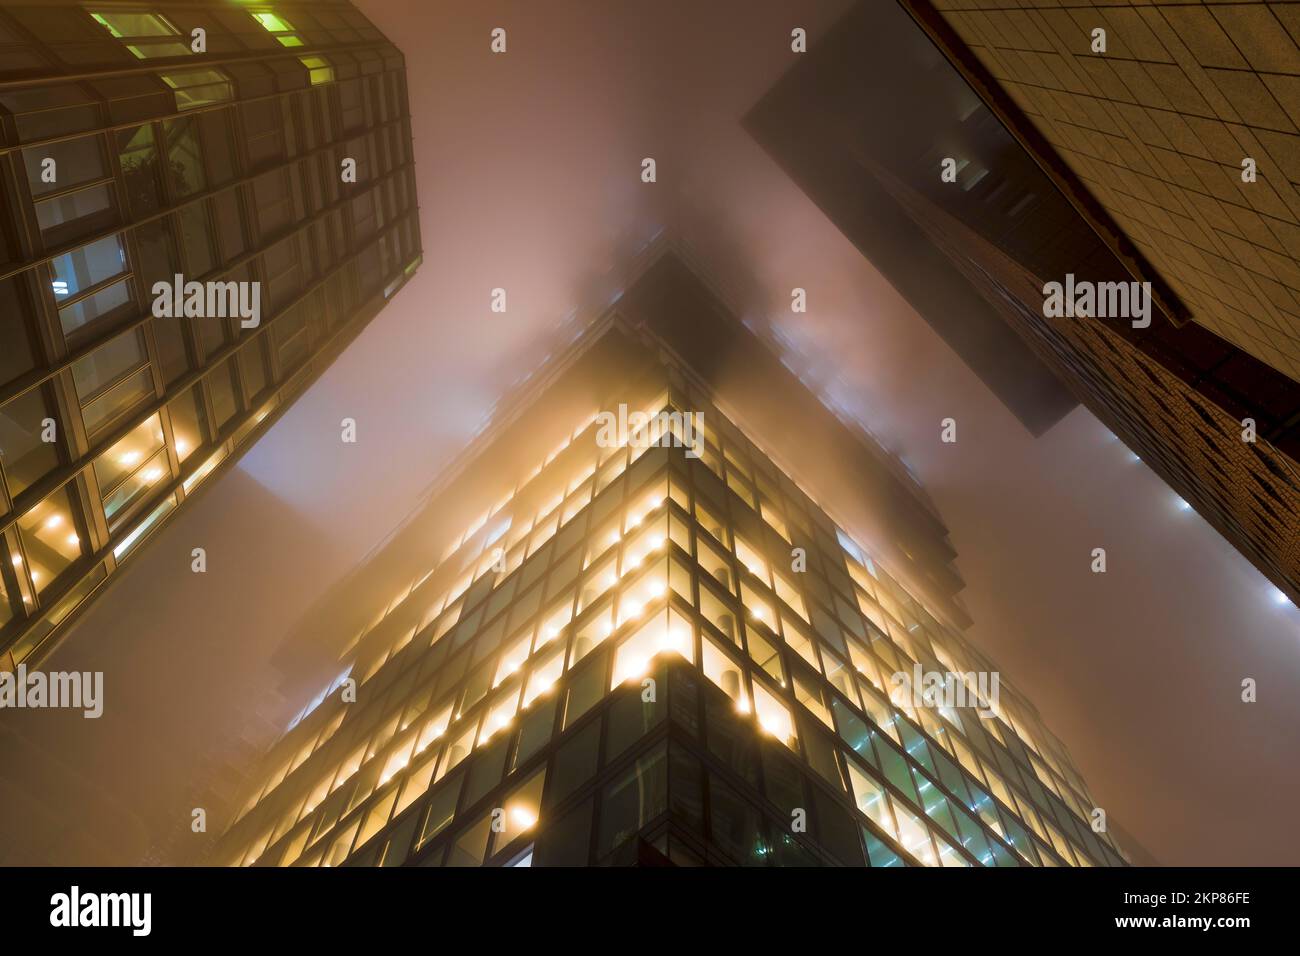 Illuminated skyscrapers in the fog at night, Omniturm in the middle, Japan Center on the right, Garden Tower on the left, banking district, Frankfurt Stock Photo